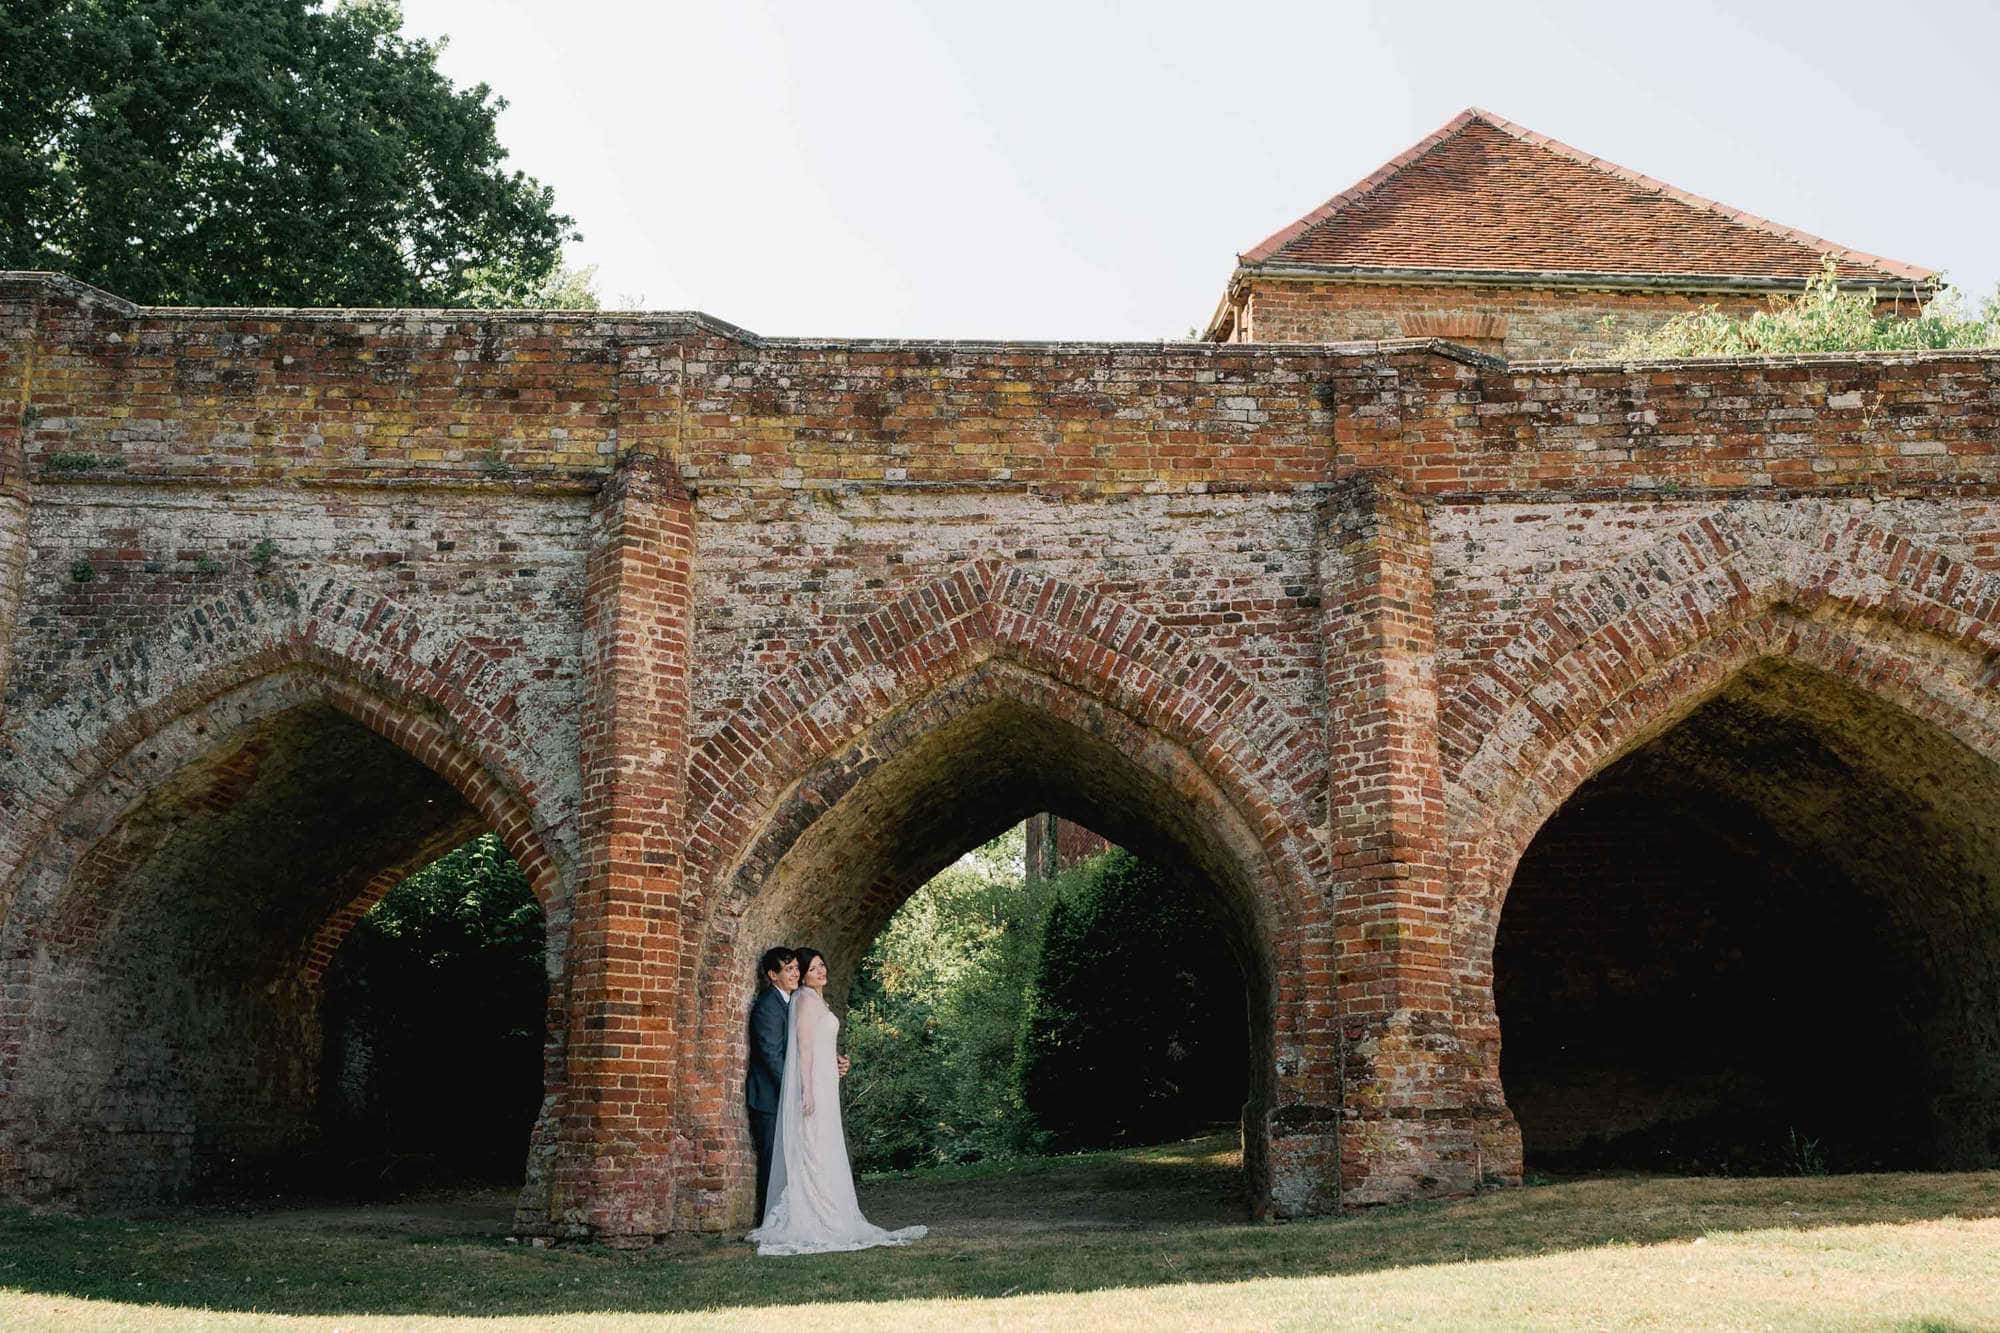 Bride and groom hug closely on their wedding day under the Tudor Bridge at Hedingham Castle in Essex.